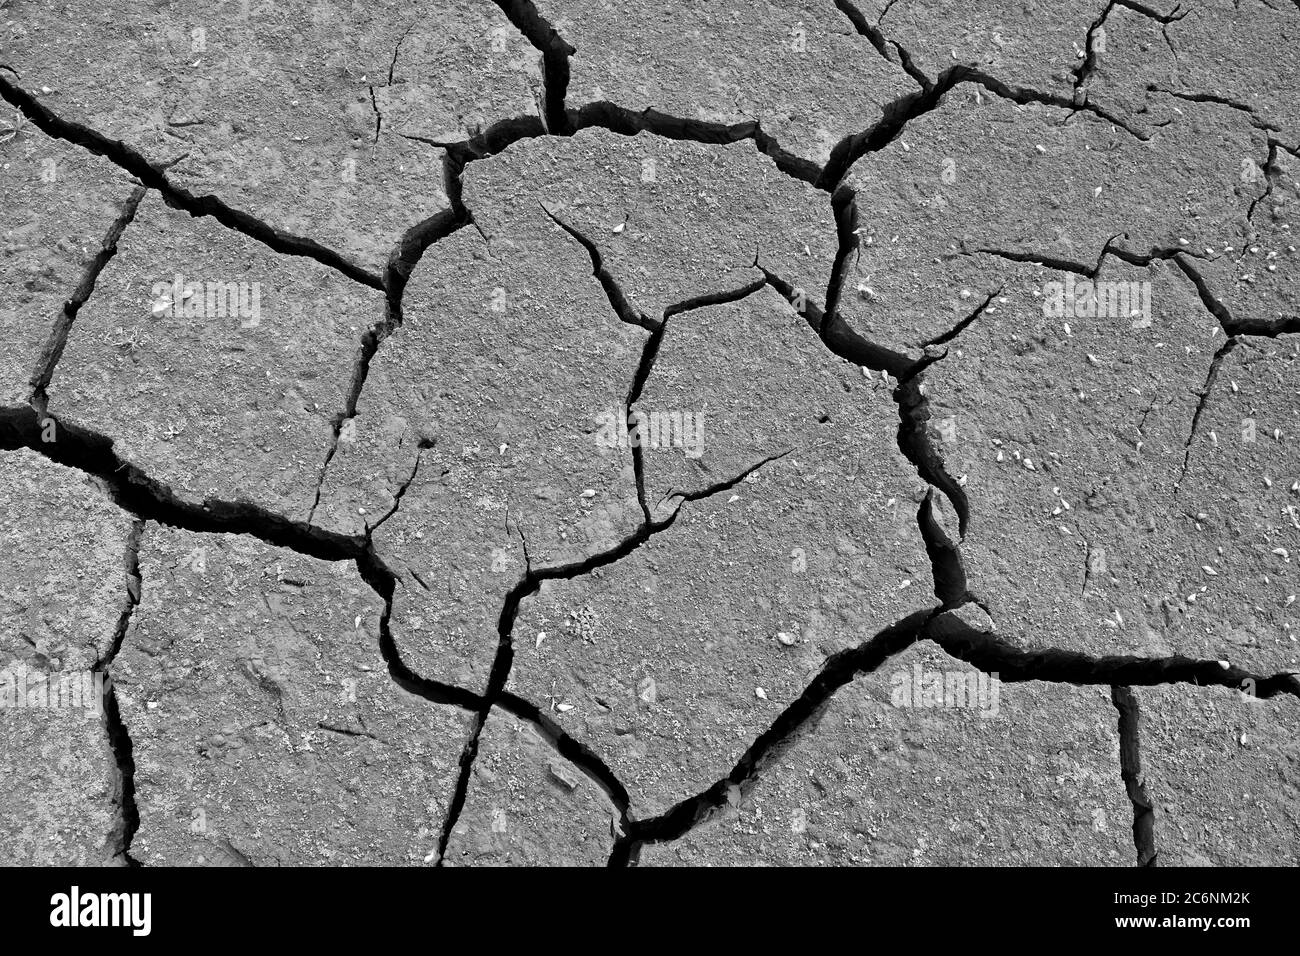 Soil textures, Drought, earth cracks, natural disasters. Stock Photo